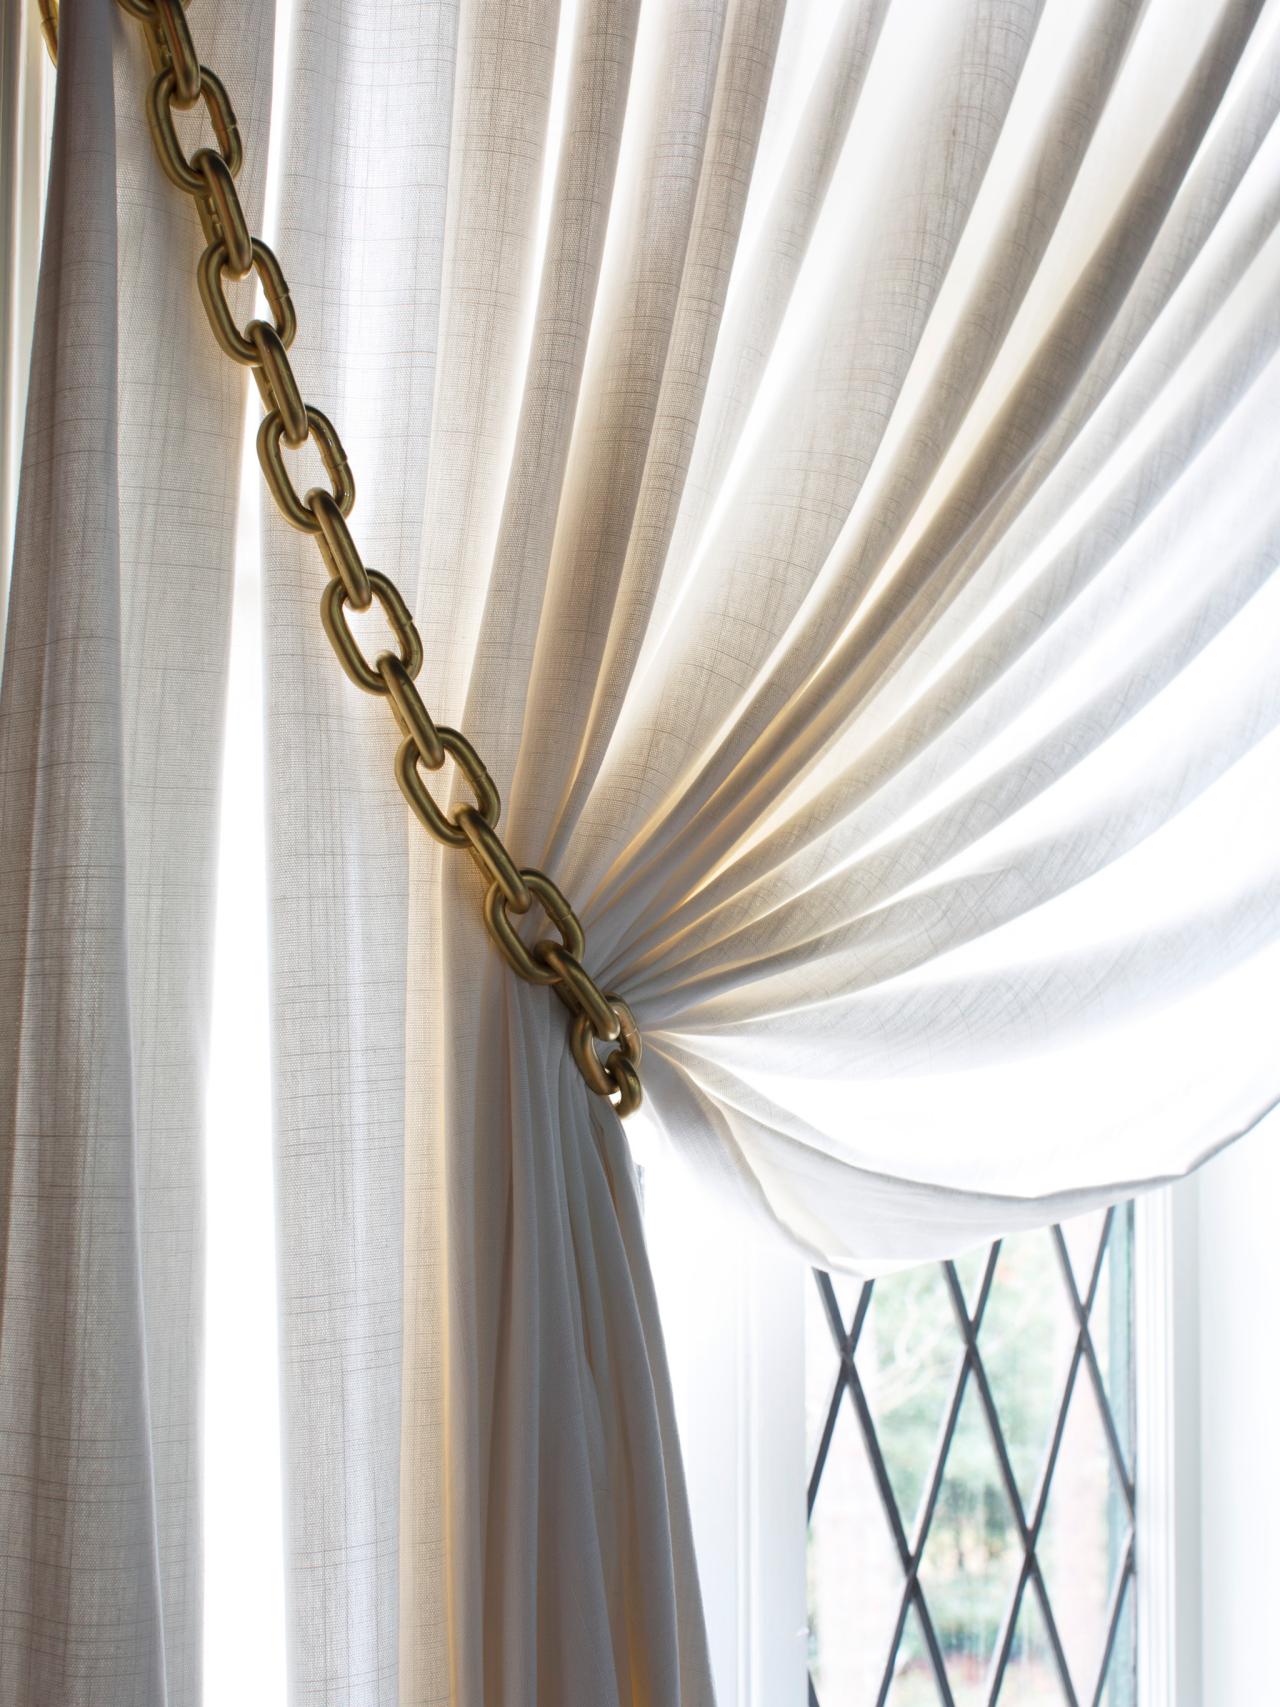 How To Hang Curtains With Holdbacks How to Make Gold Chain Curtain Tiebacks | HGTV